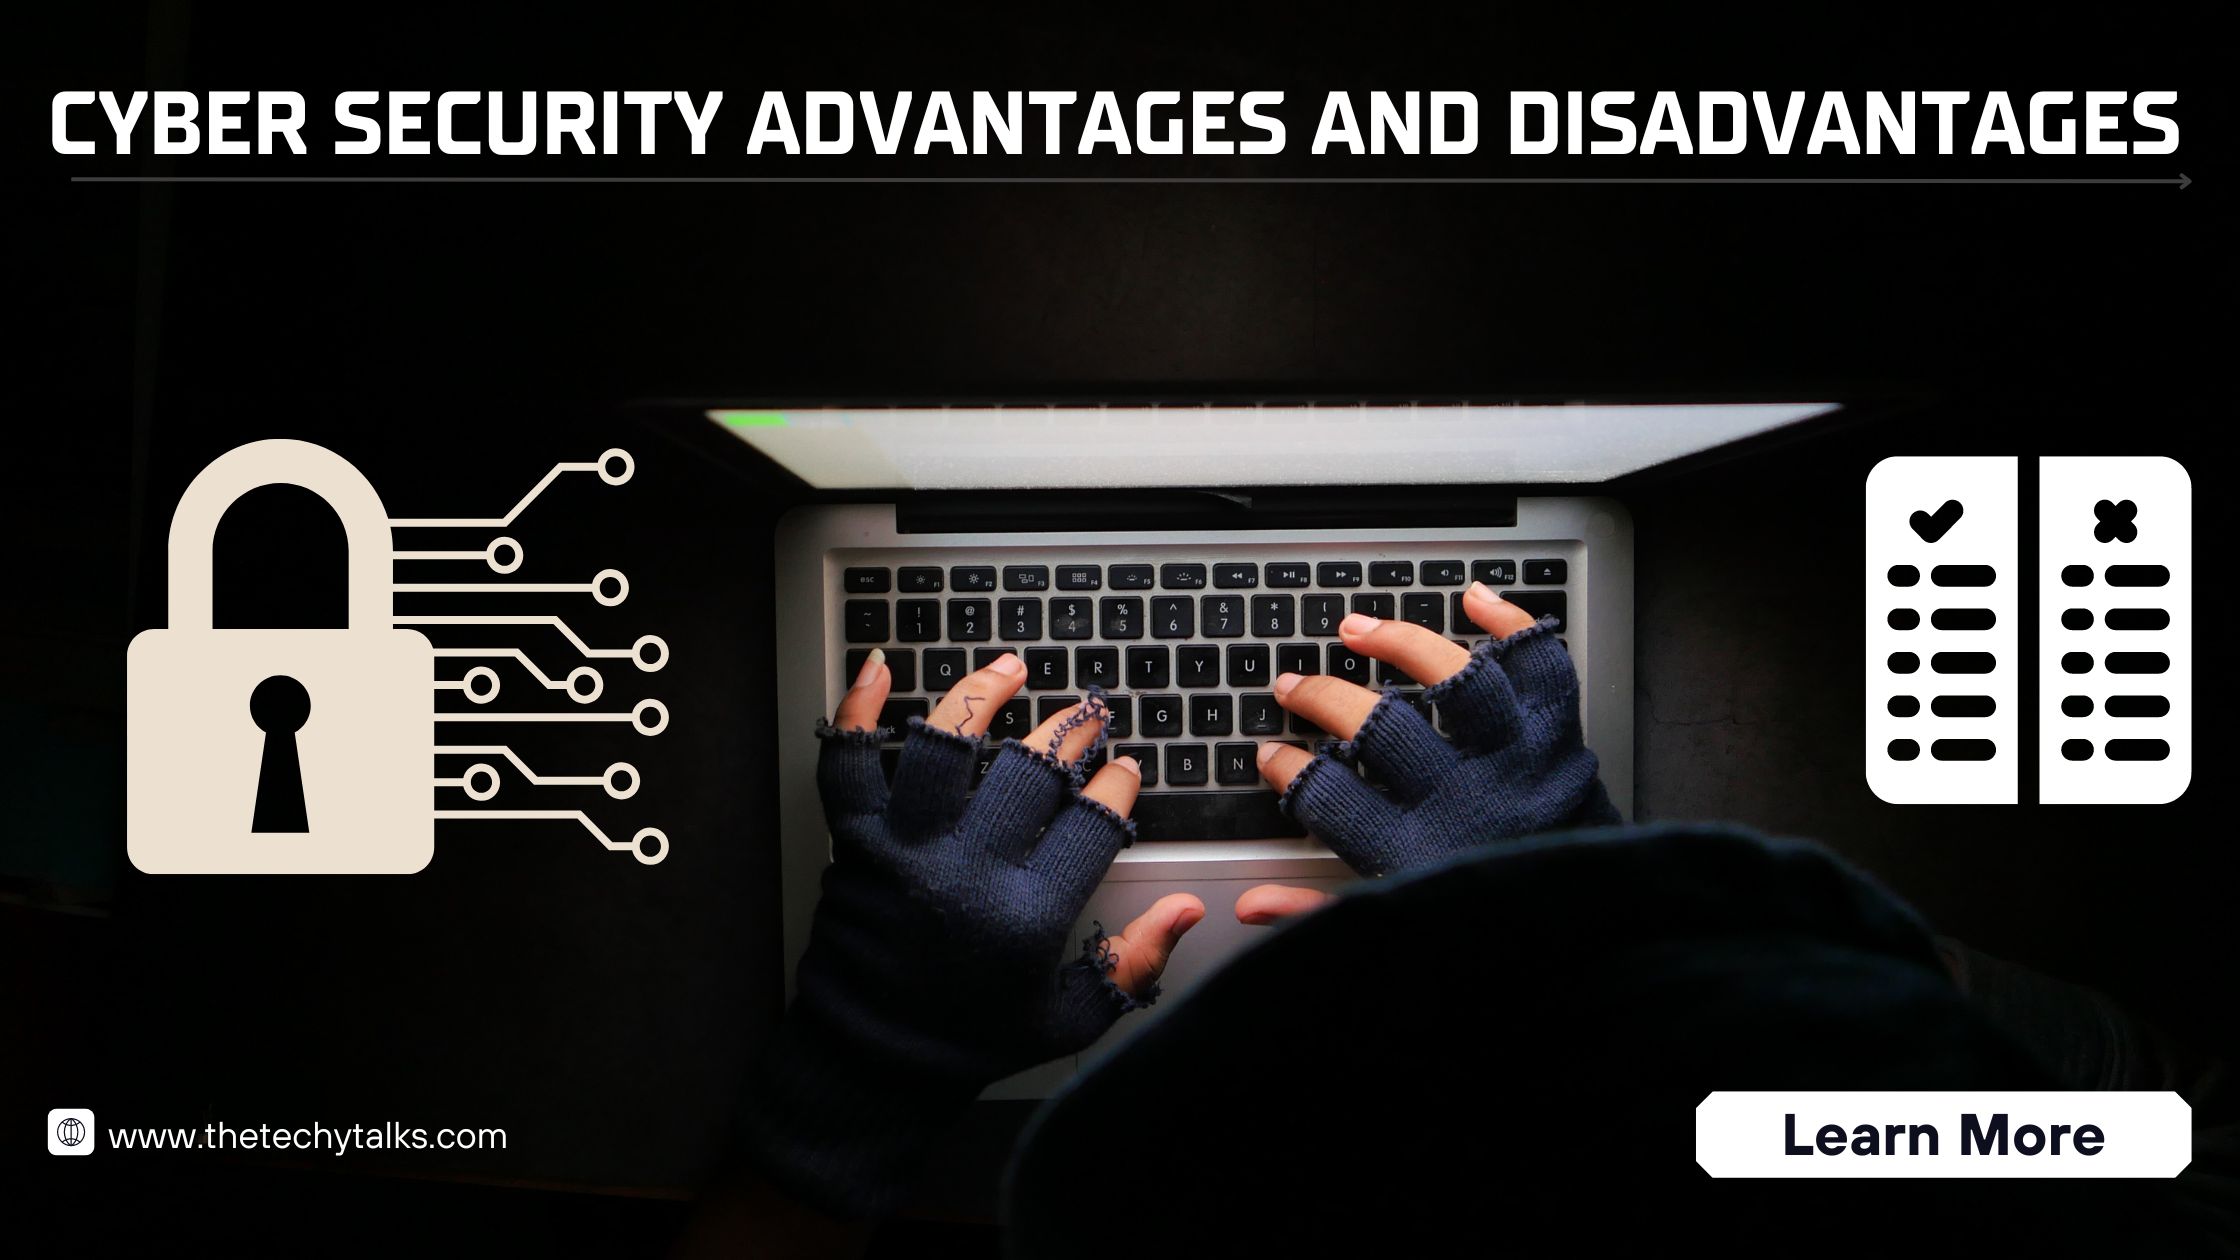 Cyber Security Advantages and Disadvantages